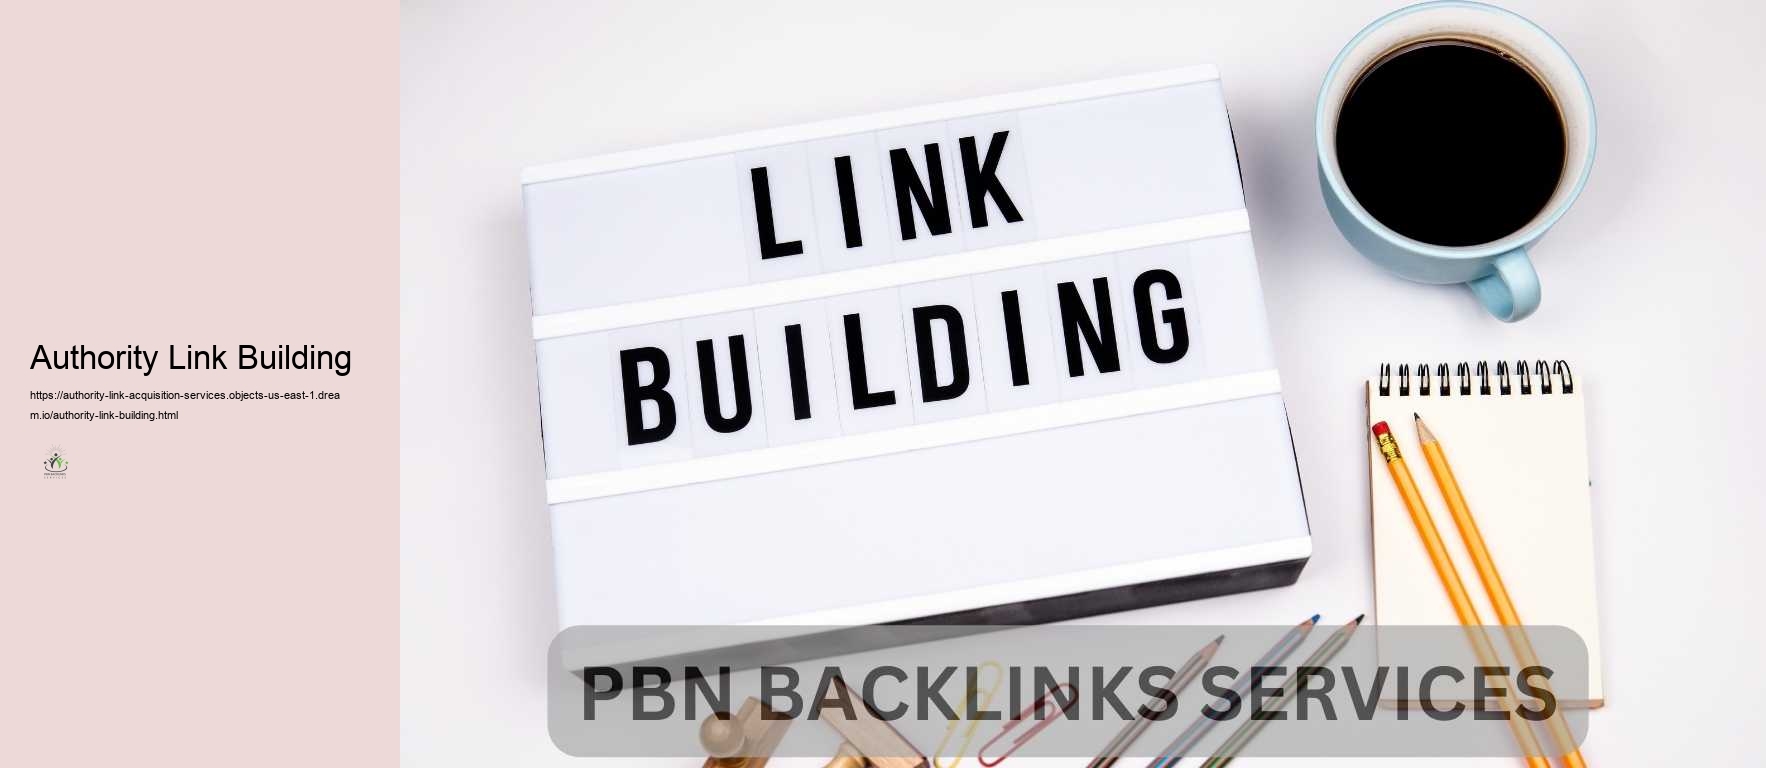 Authority Link Building